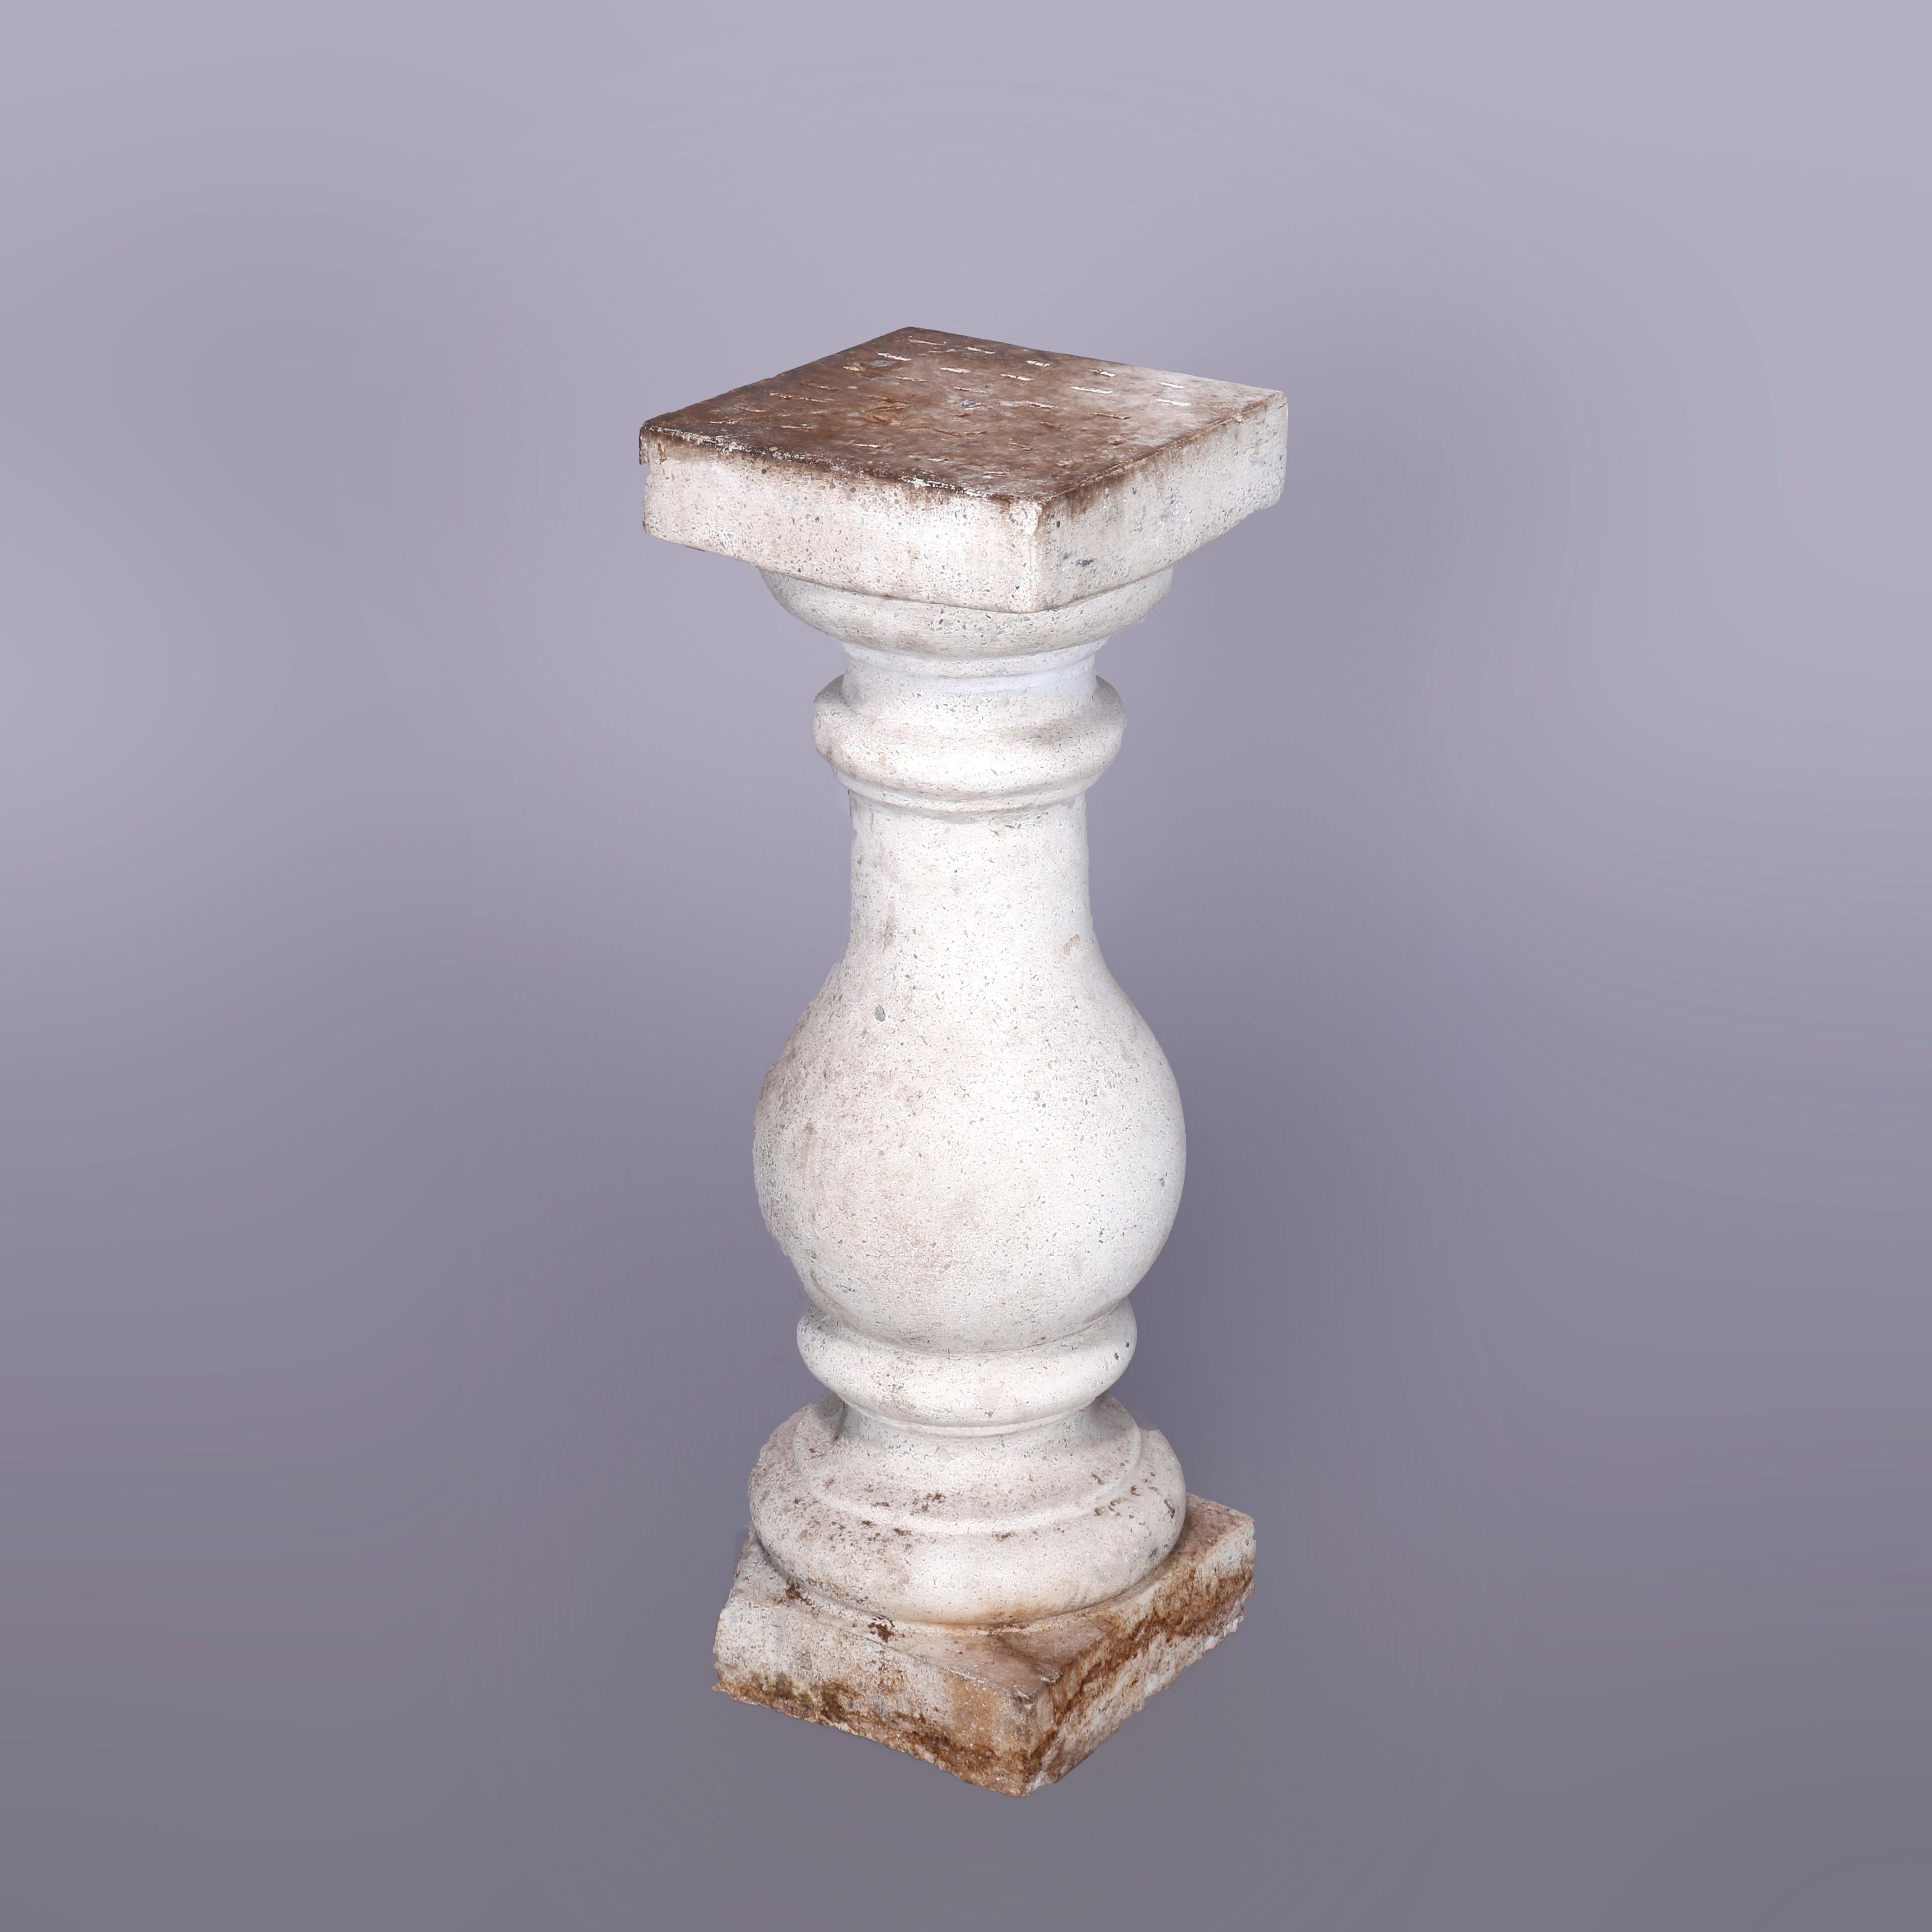 Classical Greek Classical Cast Hard Stone Balustrade Sculpture or Plant Display Pedestal 20th C For Sale